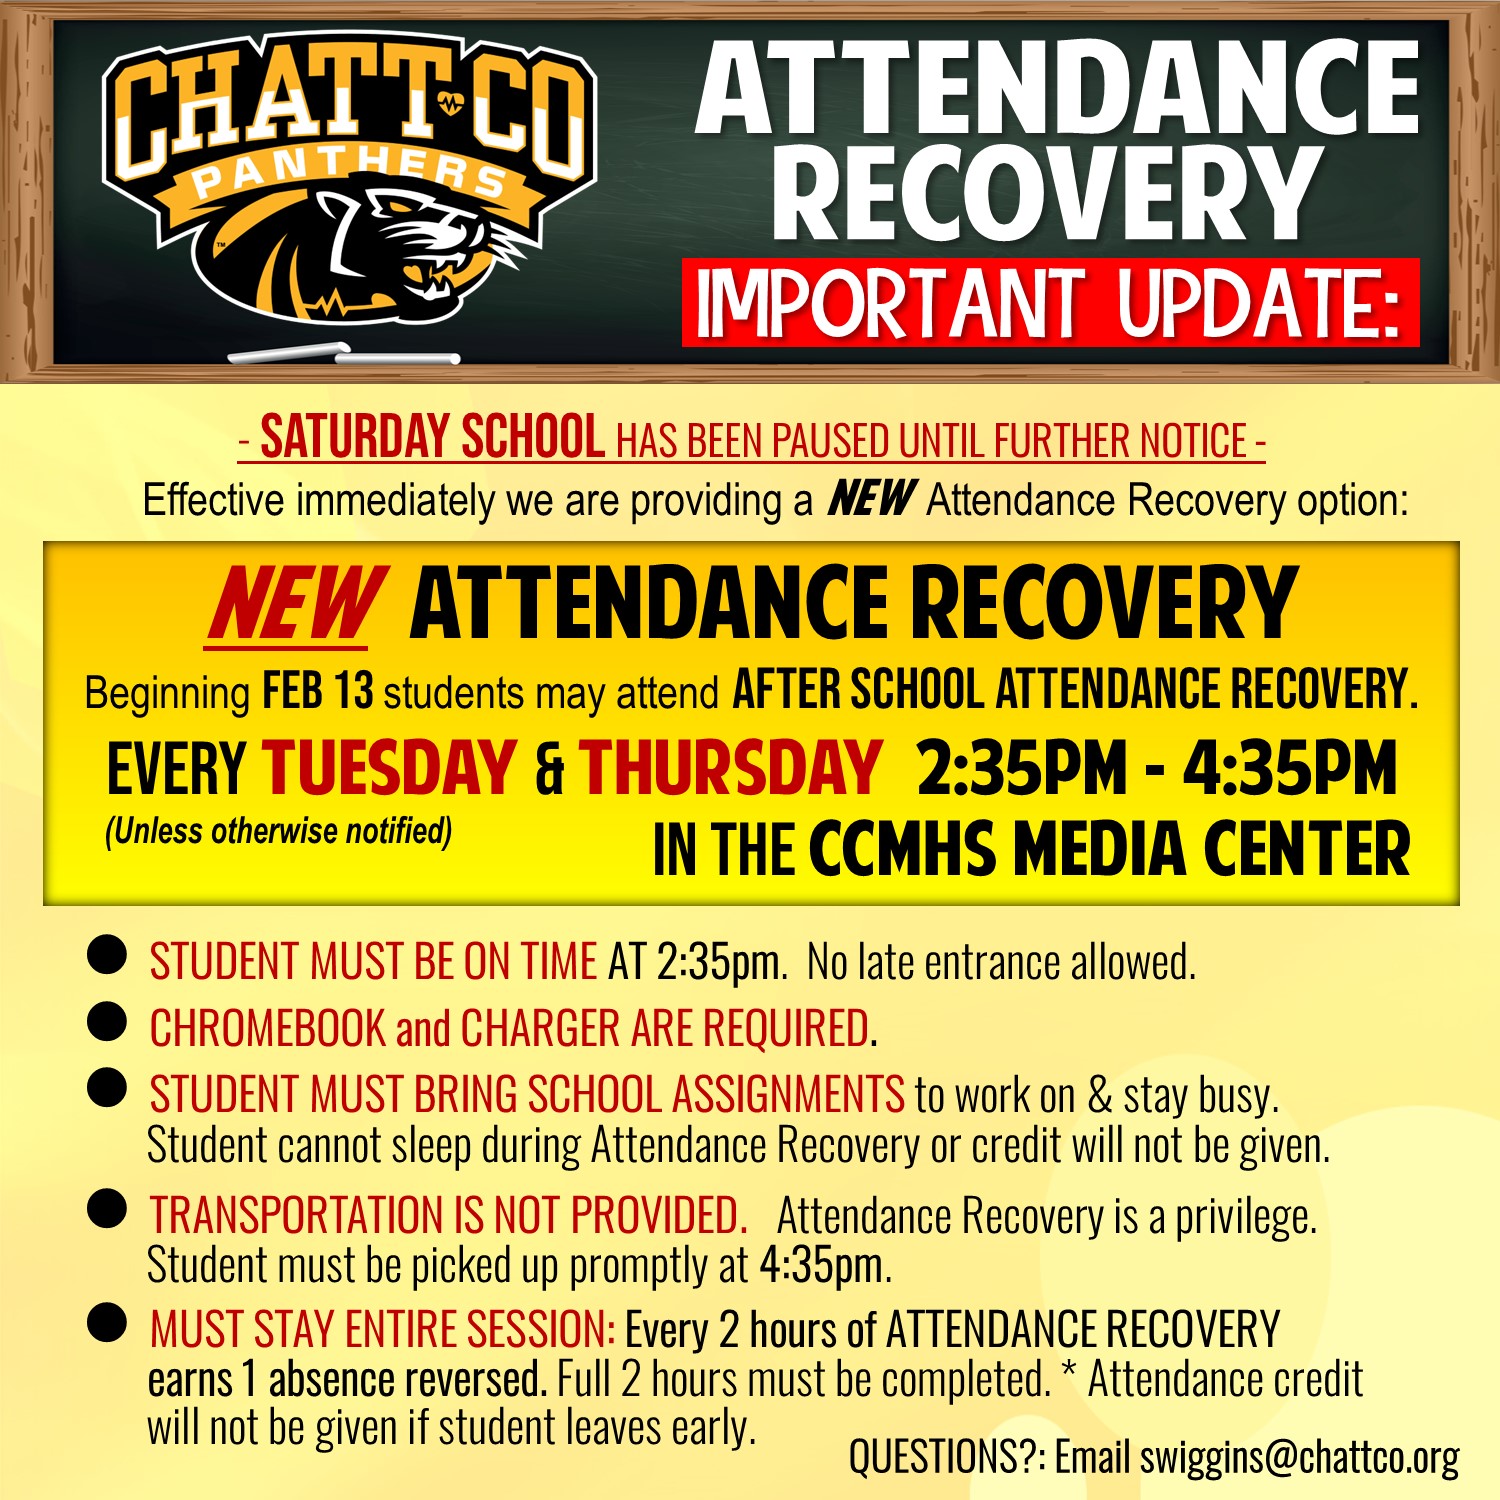 Attendance Recovery Important Update. Saturday School has been paused until further notice. Effective immediately we are providing a New Attendance Recovery option. New Attendance Recovery. Beginning Feb 13 students may attend AFTER SCHOOL ATTENDANCE RECOVERY. EVERY TUESDAY & THURSDAY  2:35PM - 4:35PM IN THE CCMHS MEDIA CENTER STUDENT MUST BE ON TIME AT 2:35pm.  No late entrance allowed. CHROMEBOOK and CHARGER ARE REQUIRED.   STUDENT MUST BRING SCHOOL ASSIGNMENTS to work on & stay busy.  Student cannot sleep during Attendance Recovery or credit will not be given.   TRANSPORTATION IS NOT PROVIDED.   Attendance Recovery is a privilege. Student must be picked up promptly at 4:35pm.